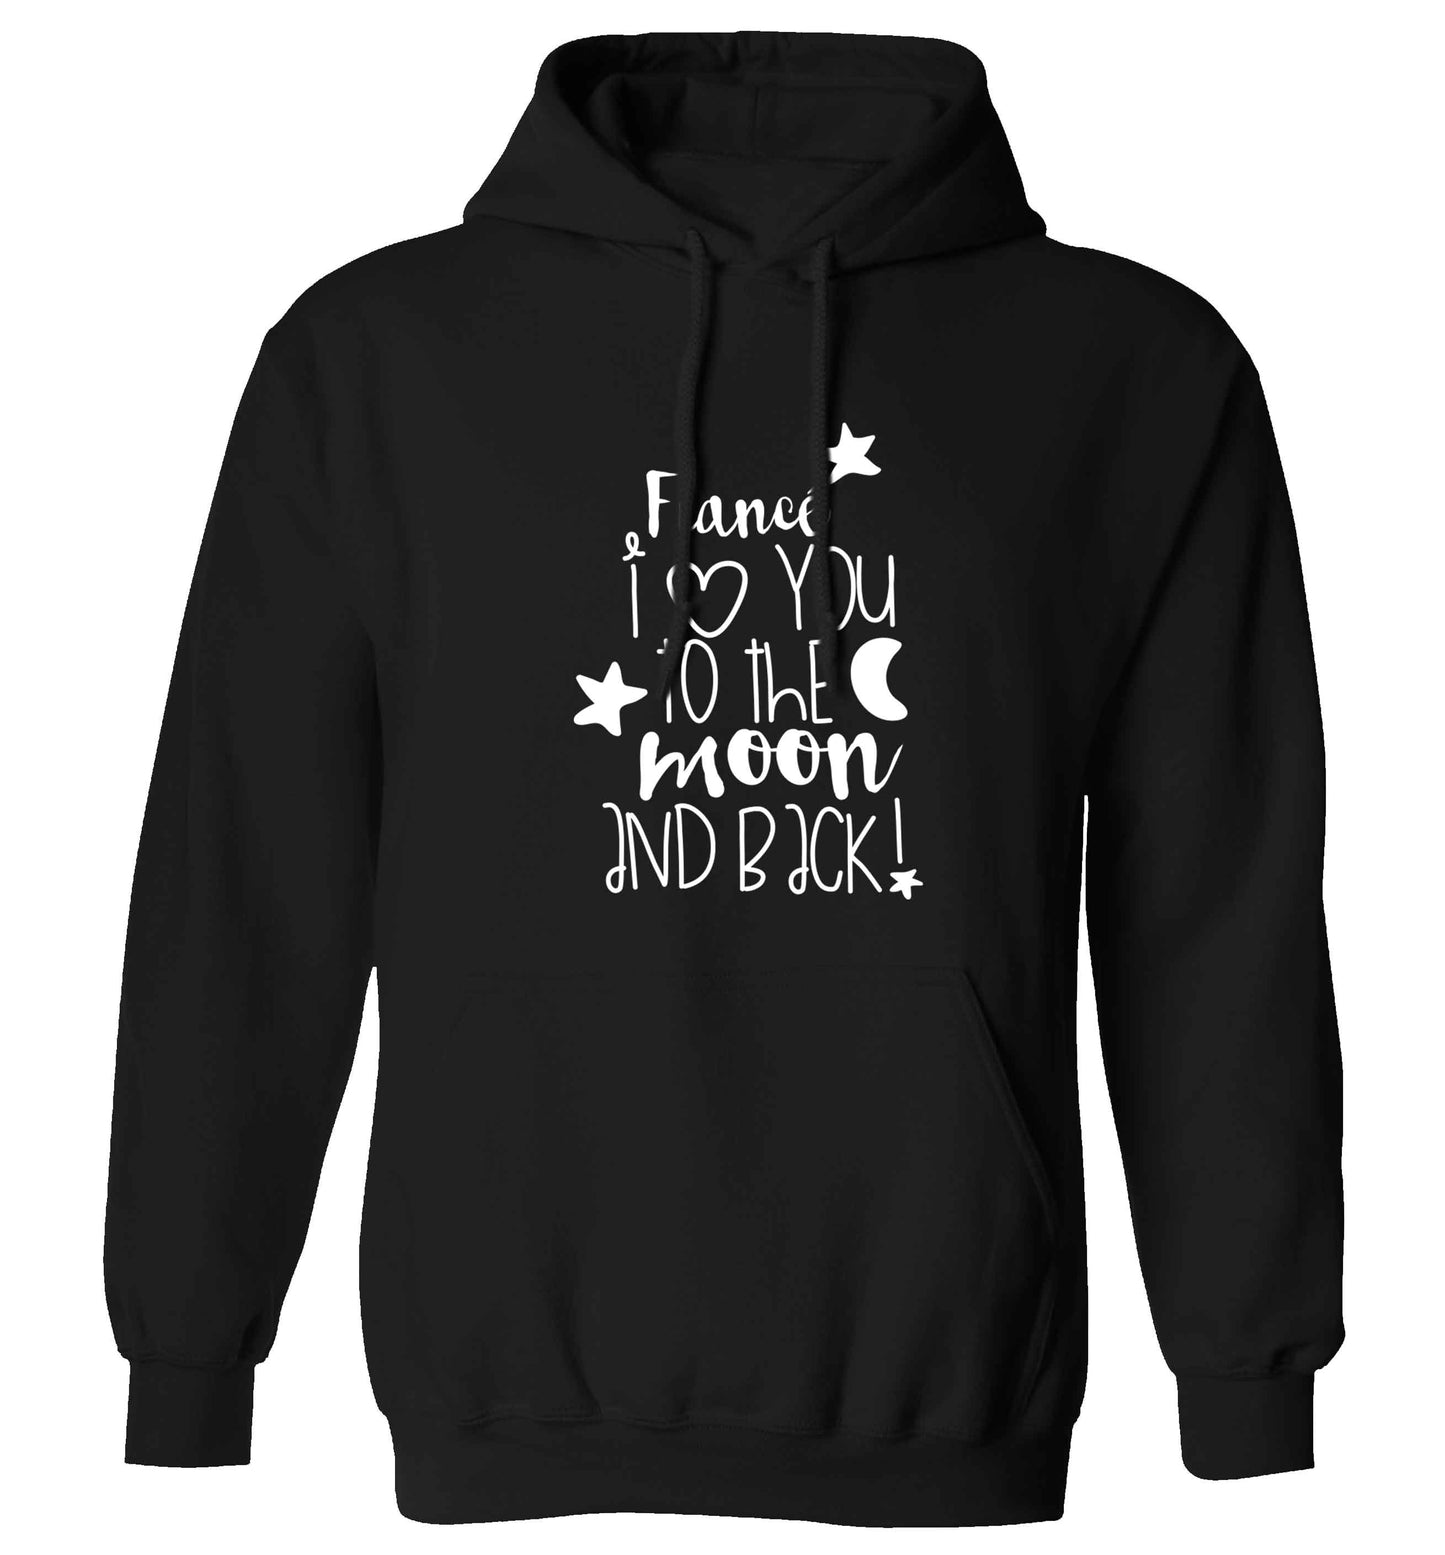 Fianc√© I love you to the moon and back adults unisex black hoodie 2XL